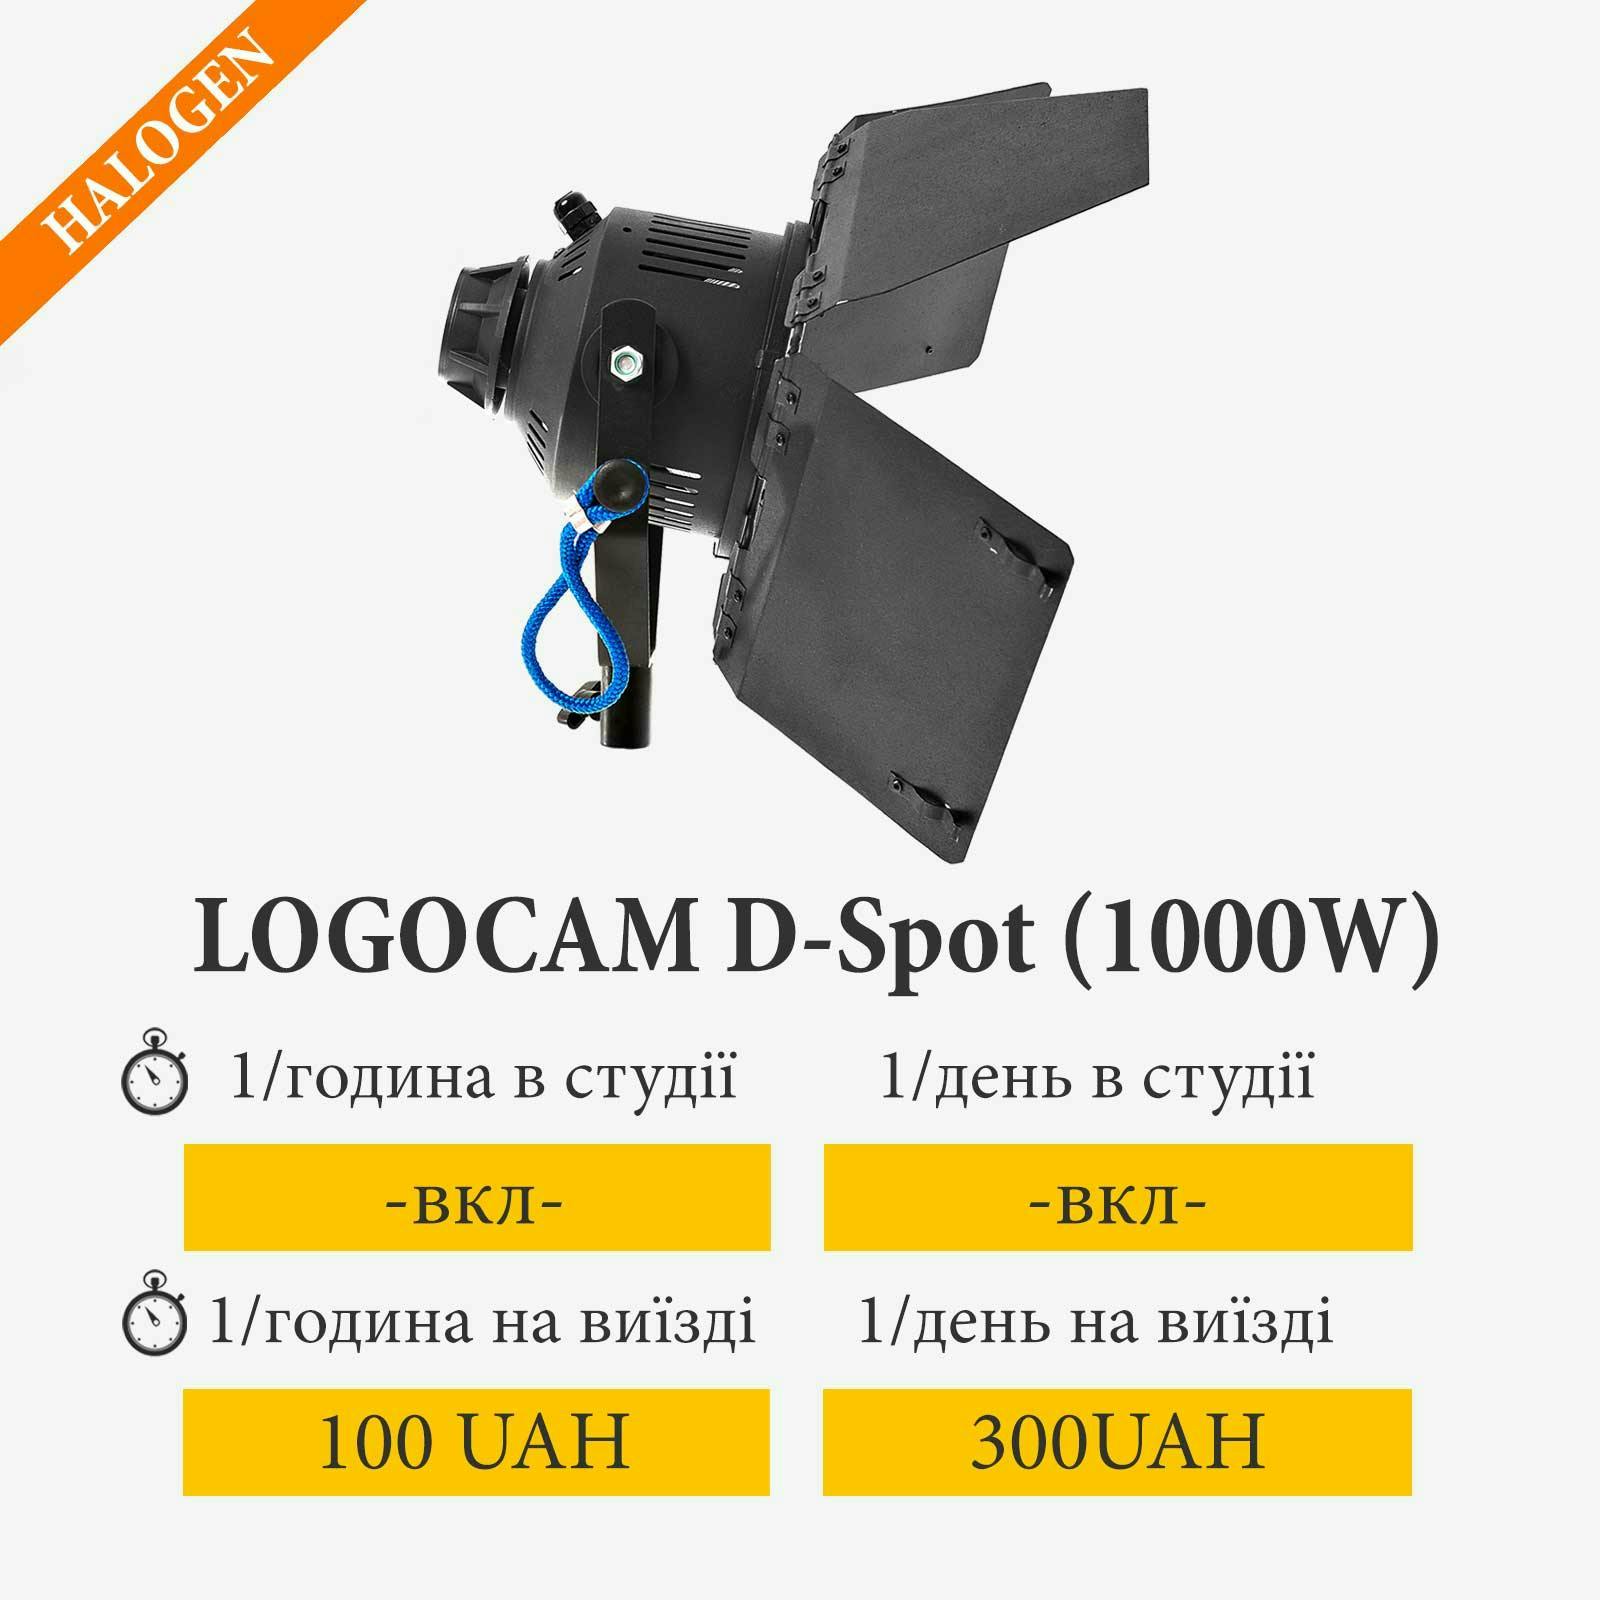 Cover image from Logocam D-spot